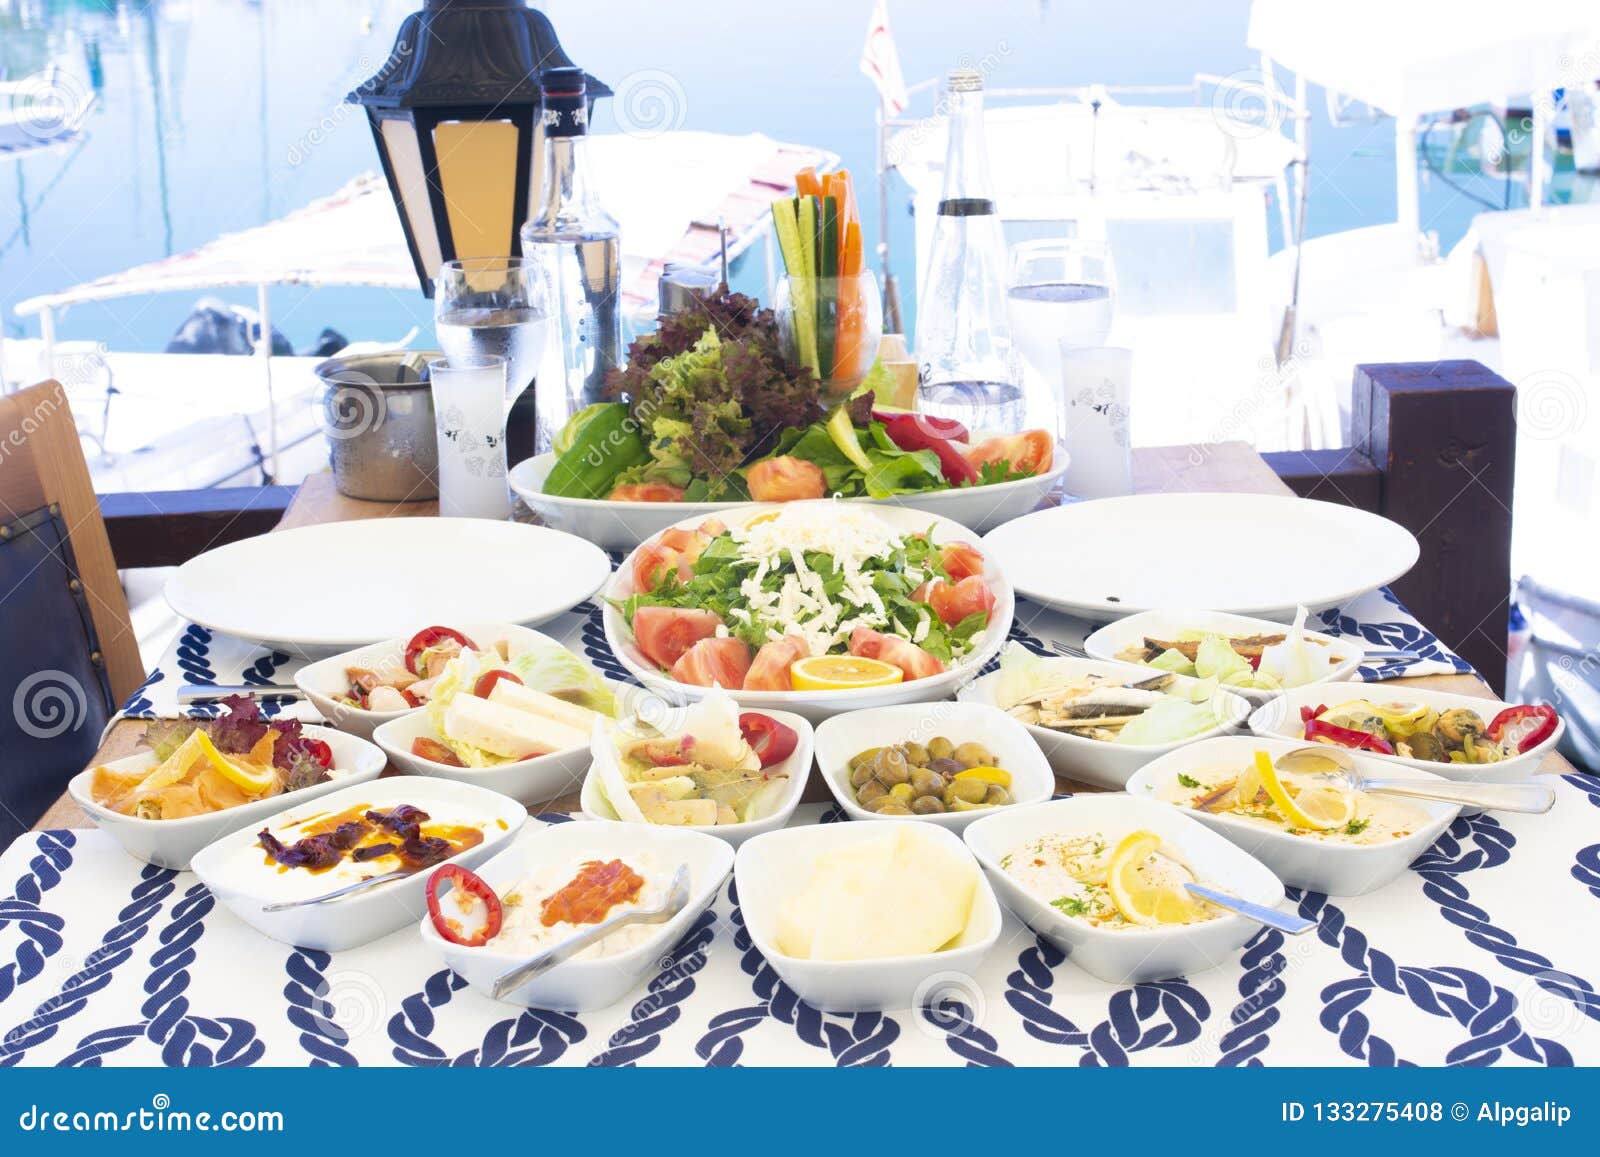 Seafoods, Fish, Salad And Mezes On The Table Near The Sea